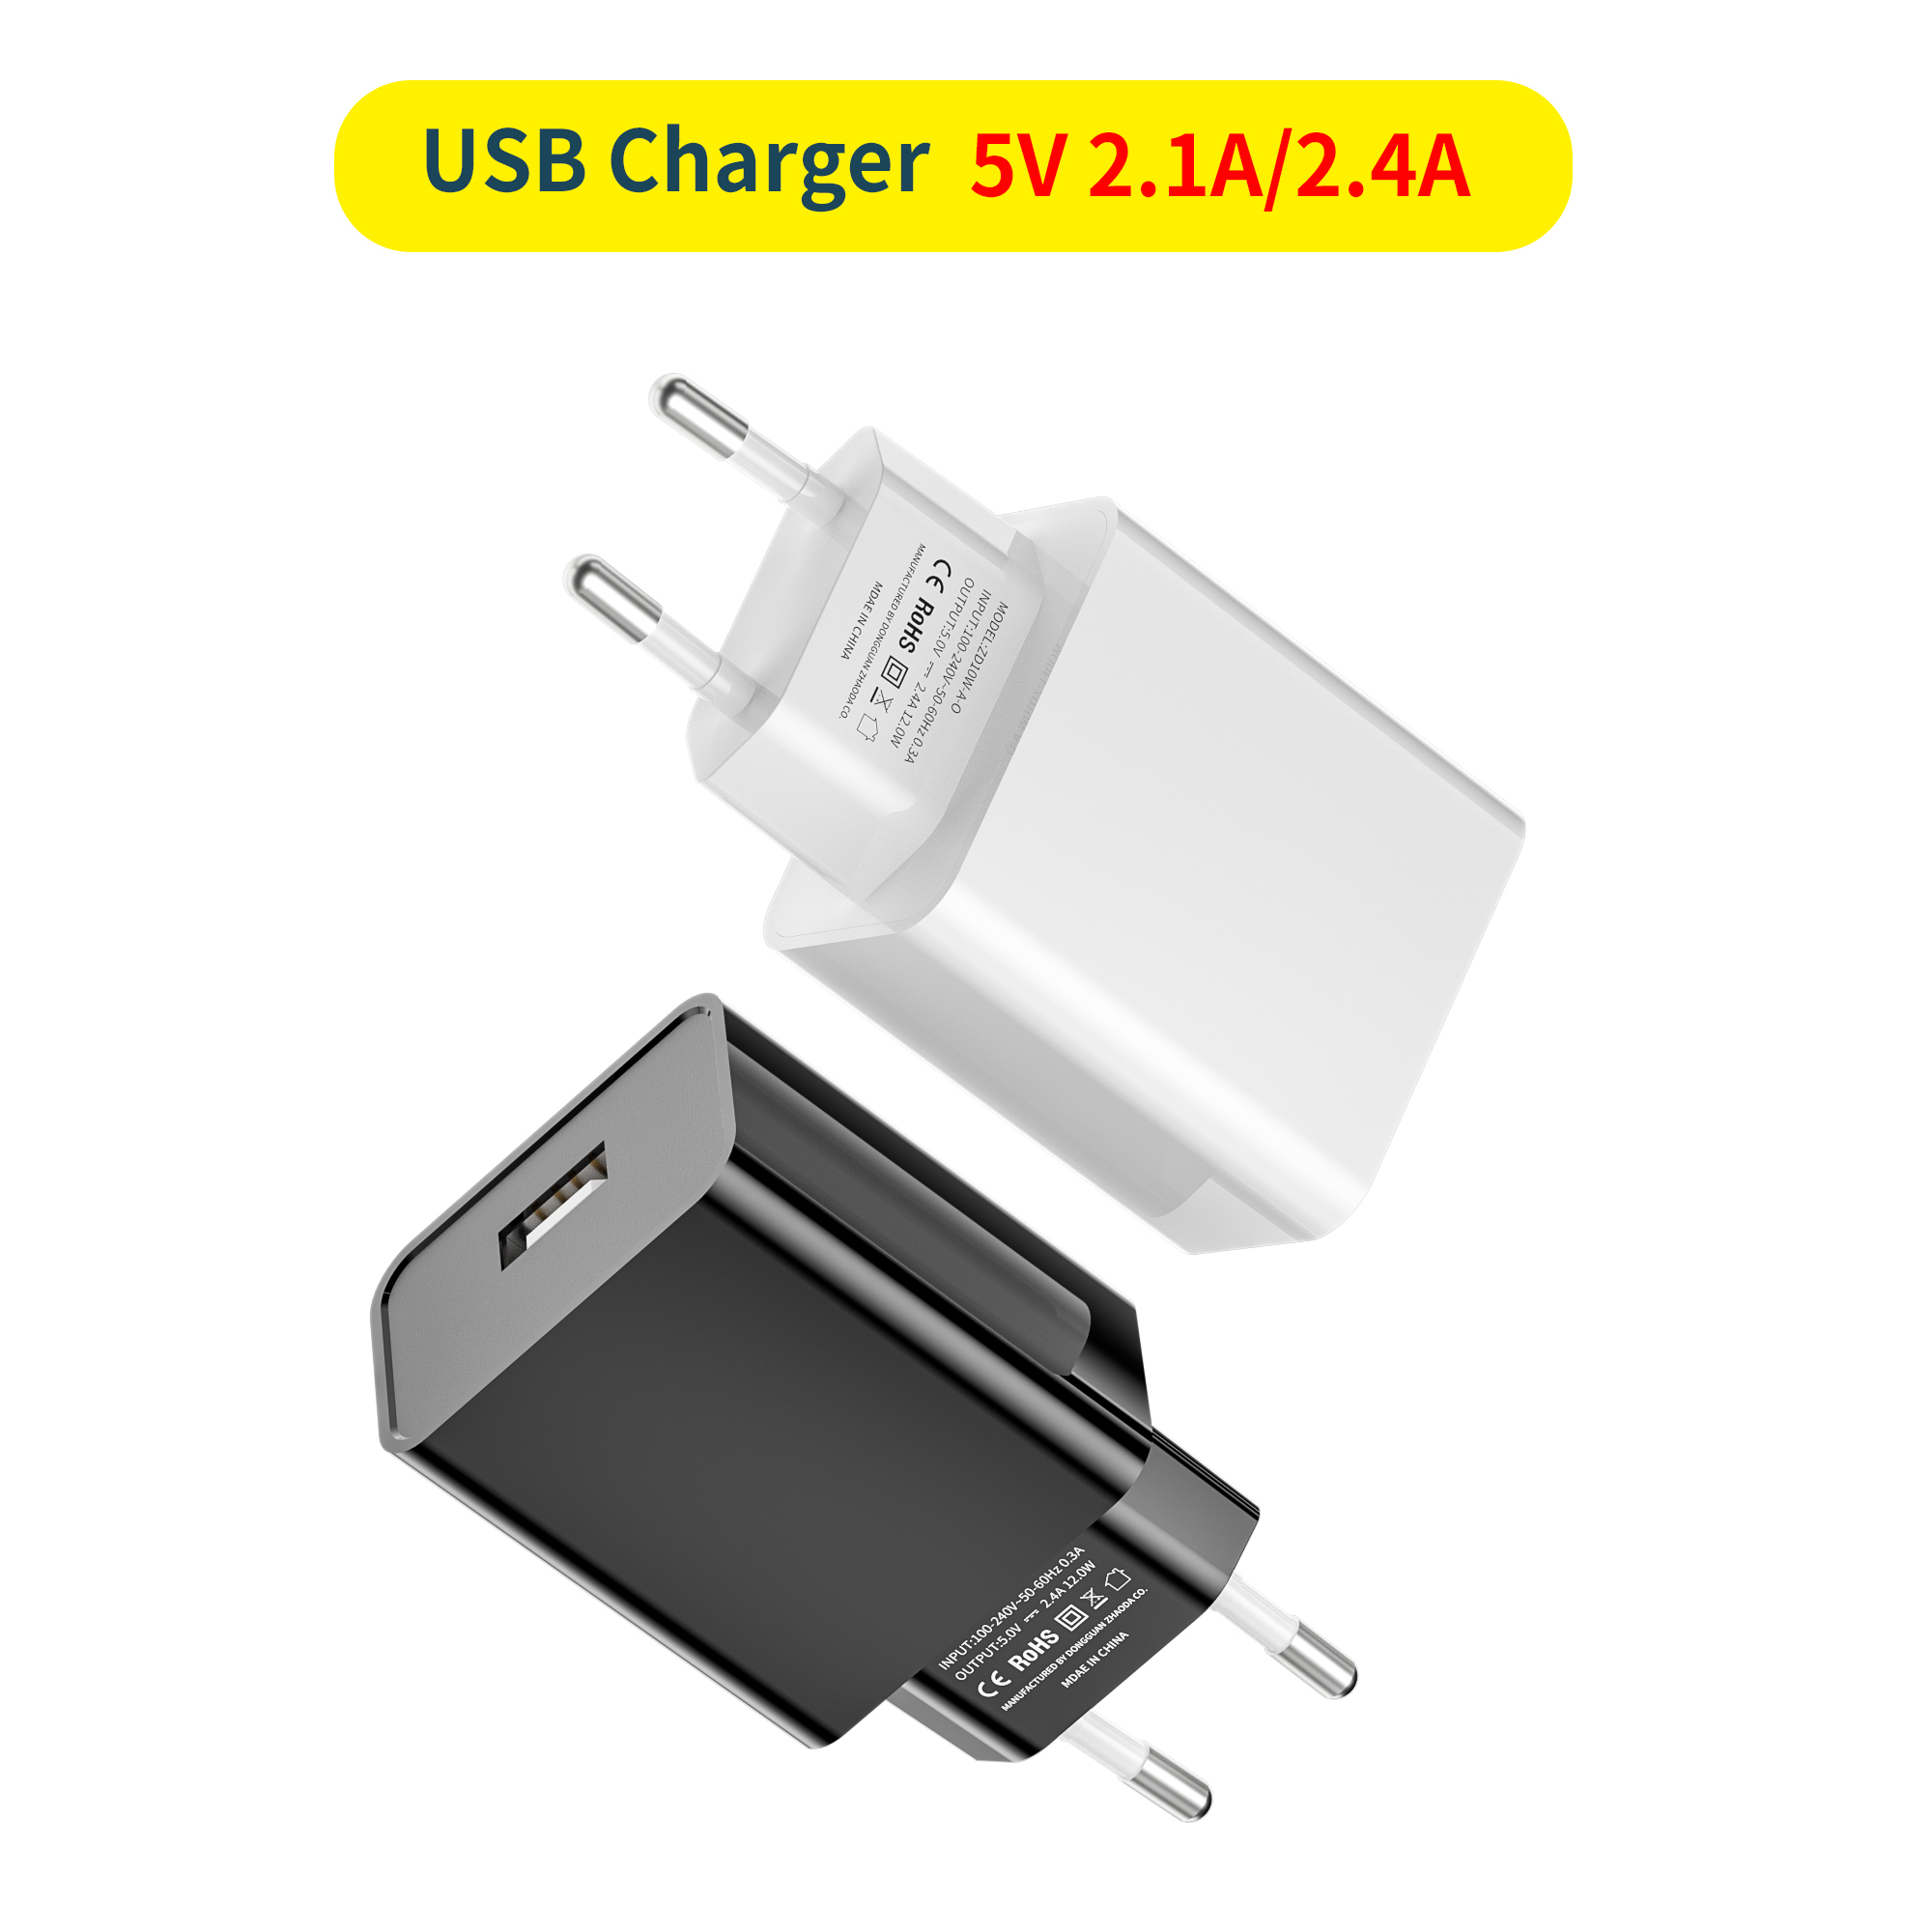 12W USB Charging EU Plug Wall Travel Adapter European Standard Charger for iPhone, Samsung, iPad Tablet